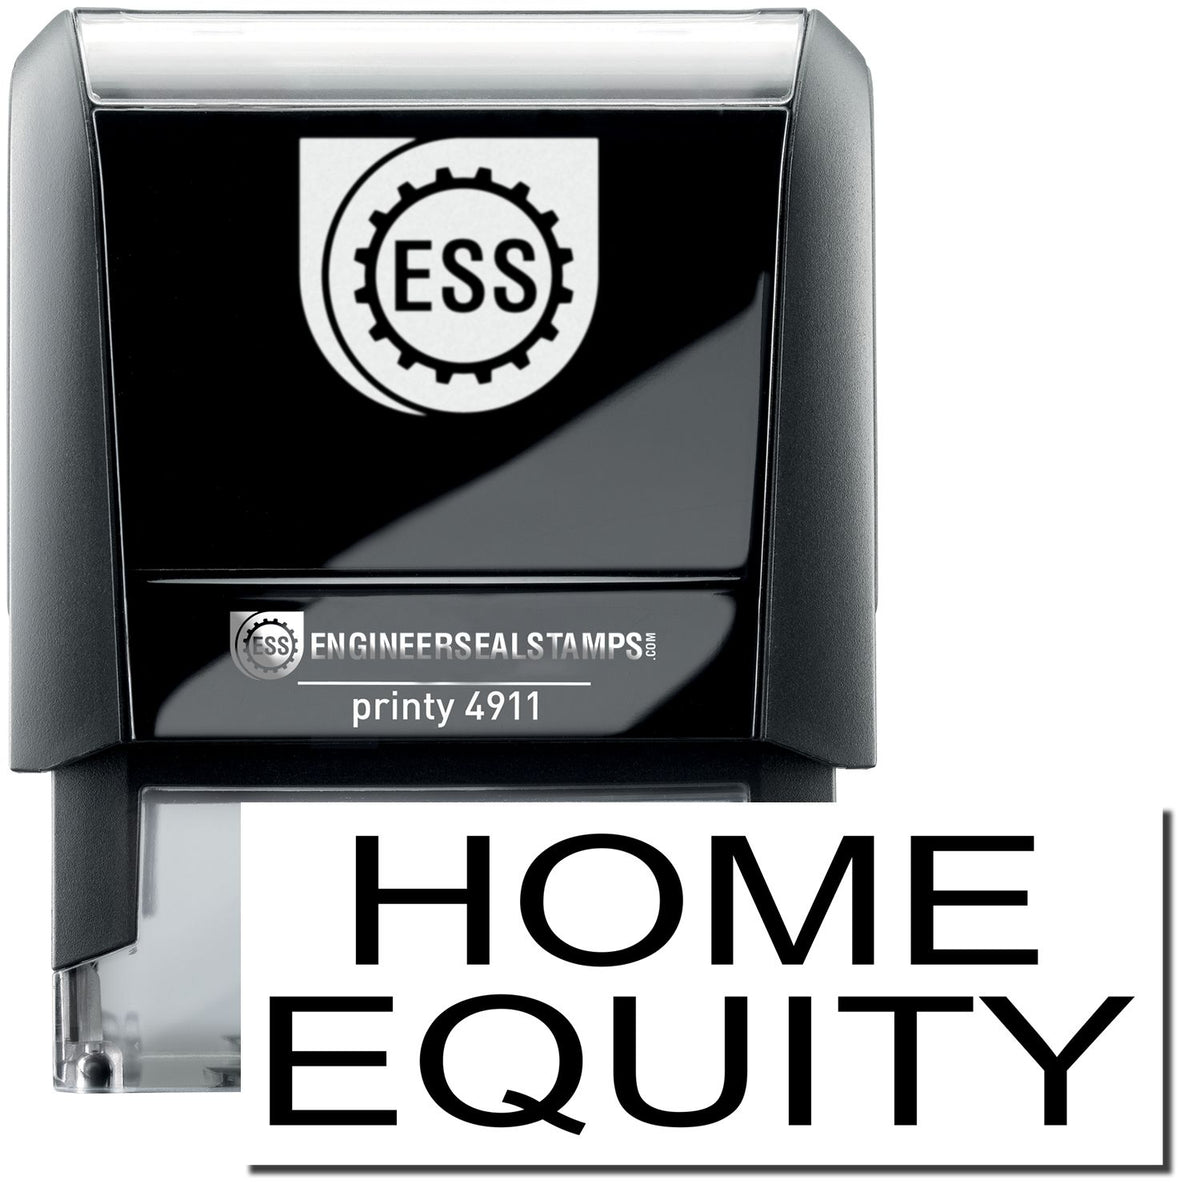 A self-inking stamp with a stamped image showing how the text &quot;HOME EQUITY&quot; is displayed after stamping.